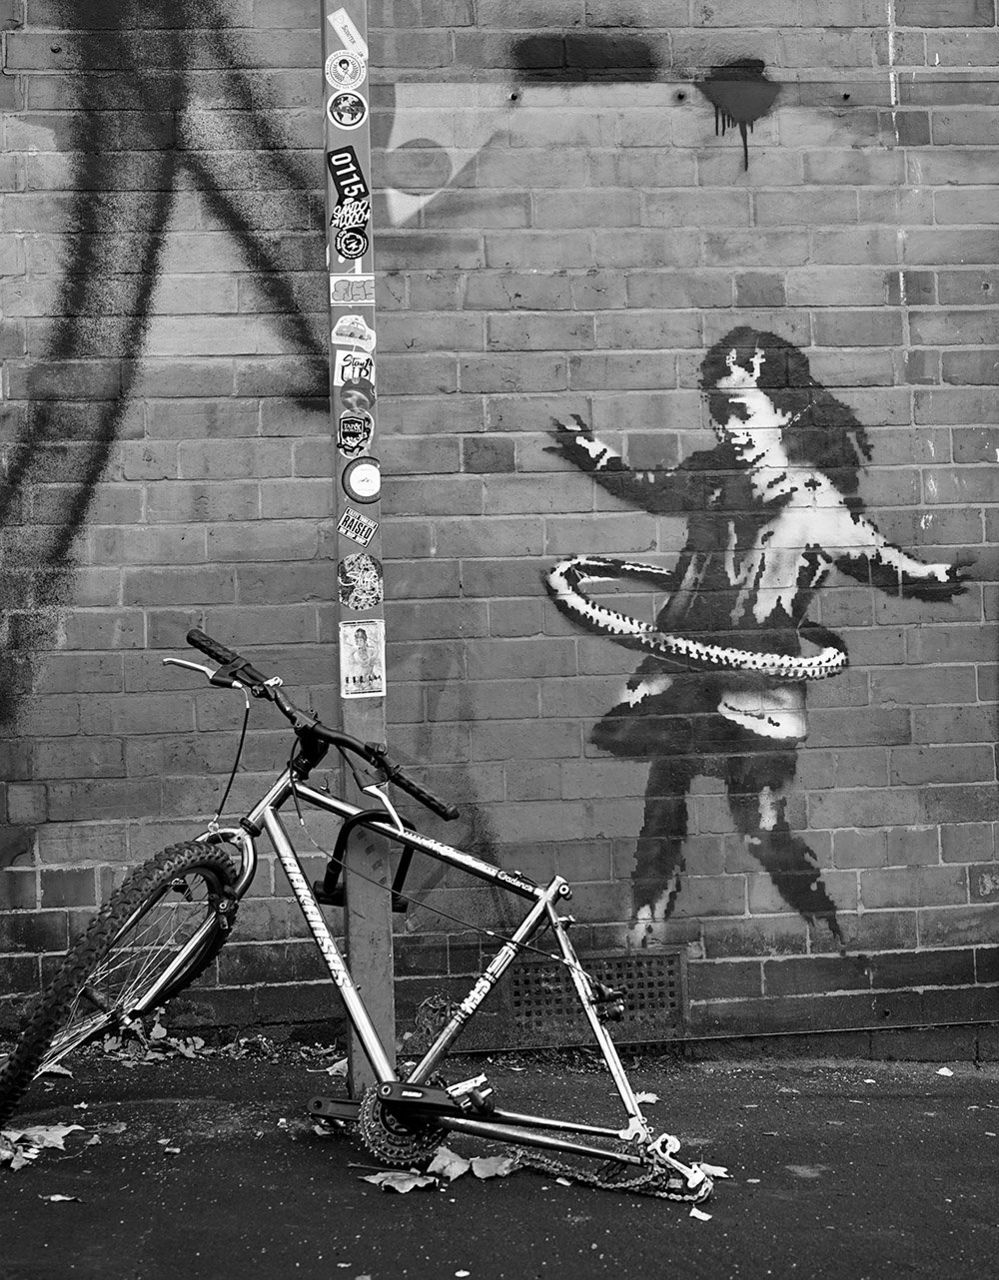 Banksy art on the wall alongside an old bicycle